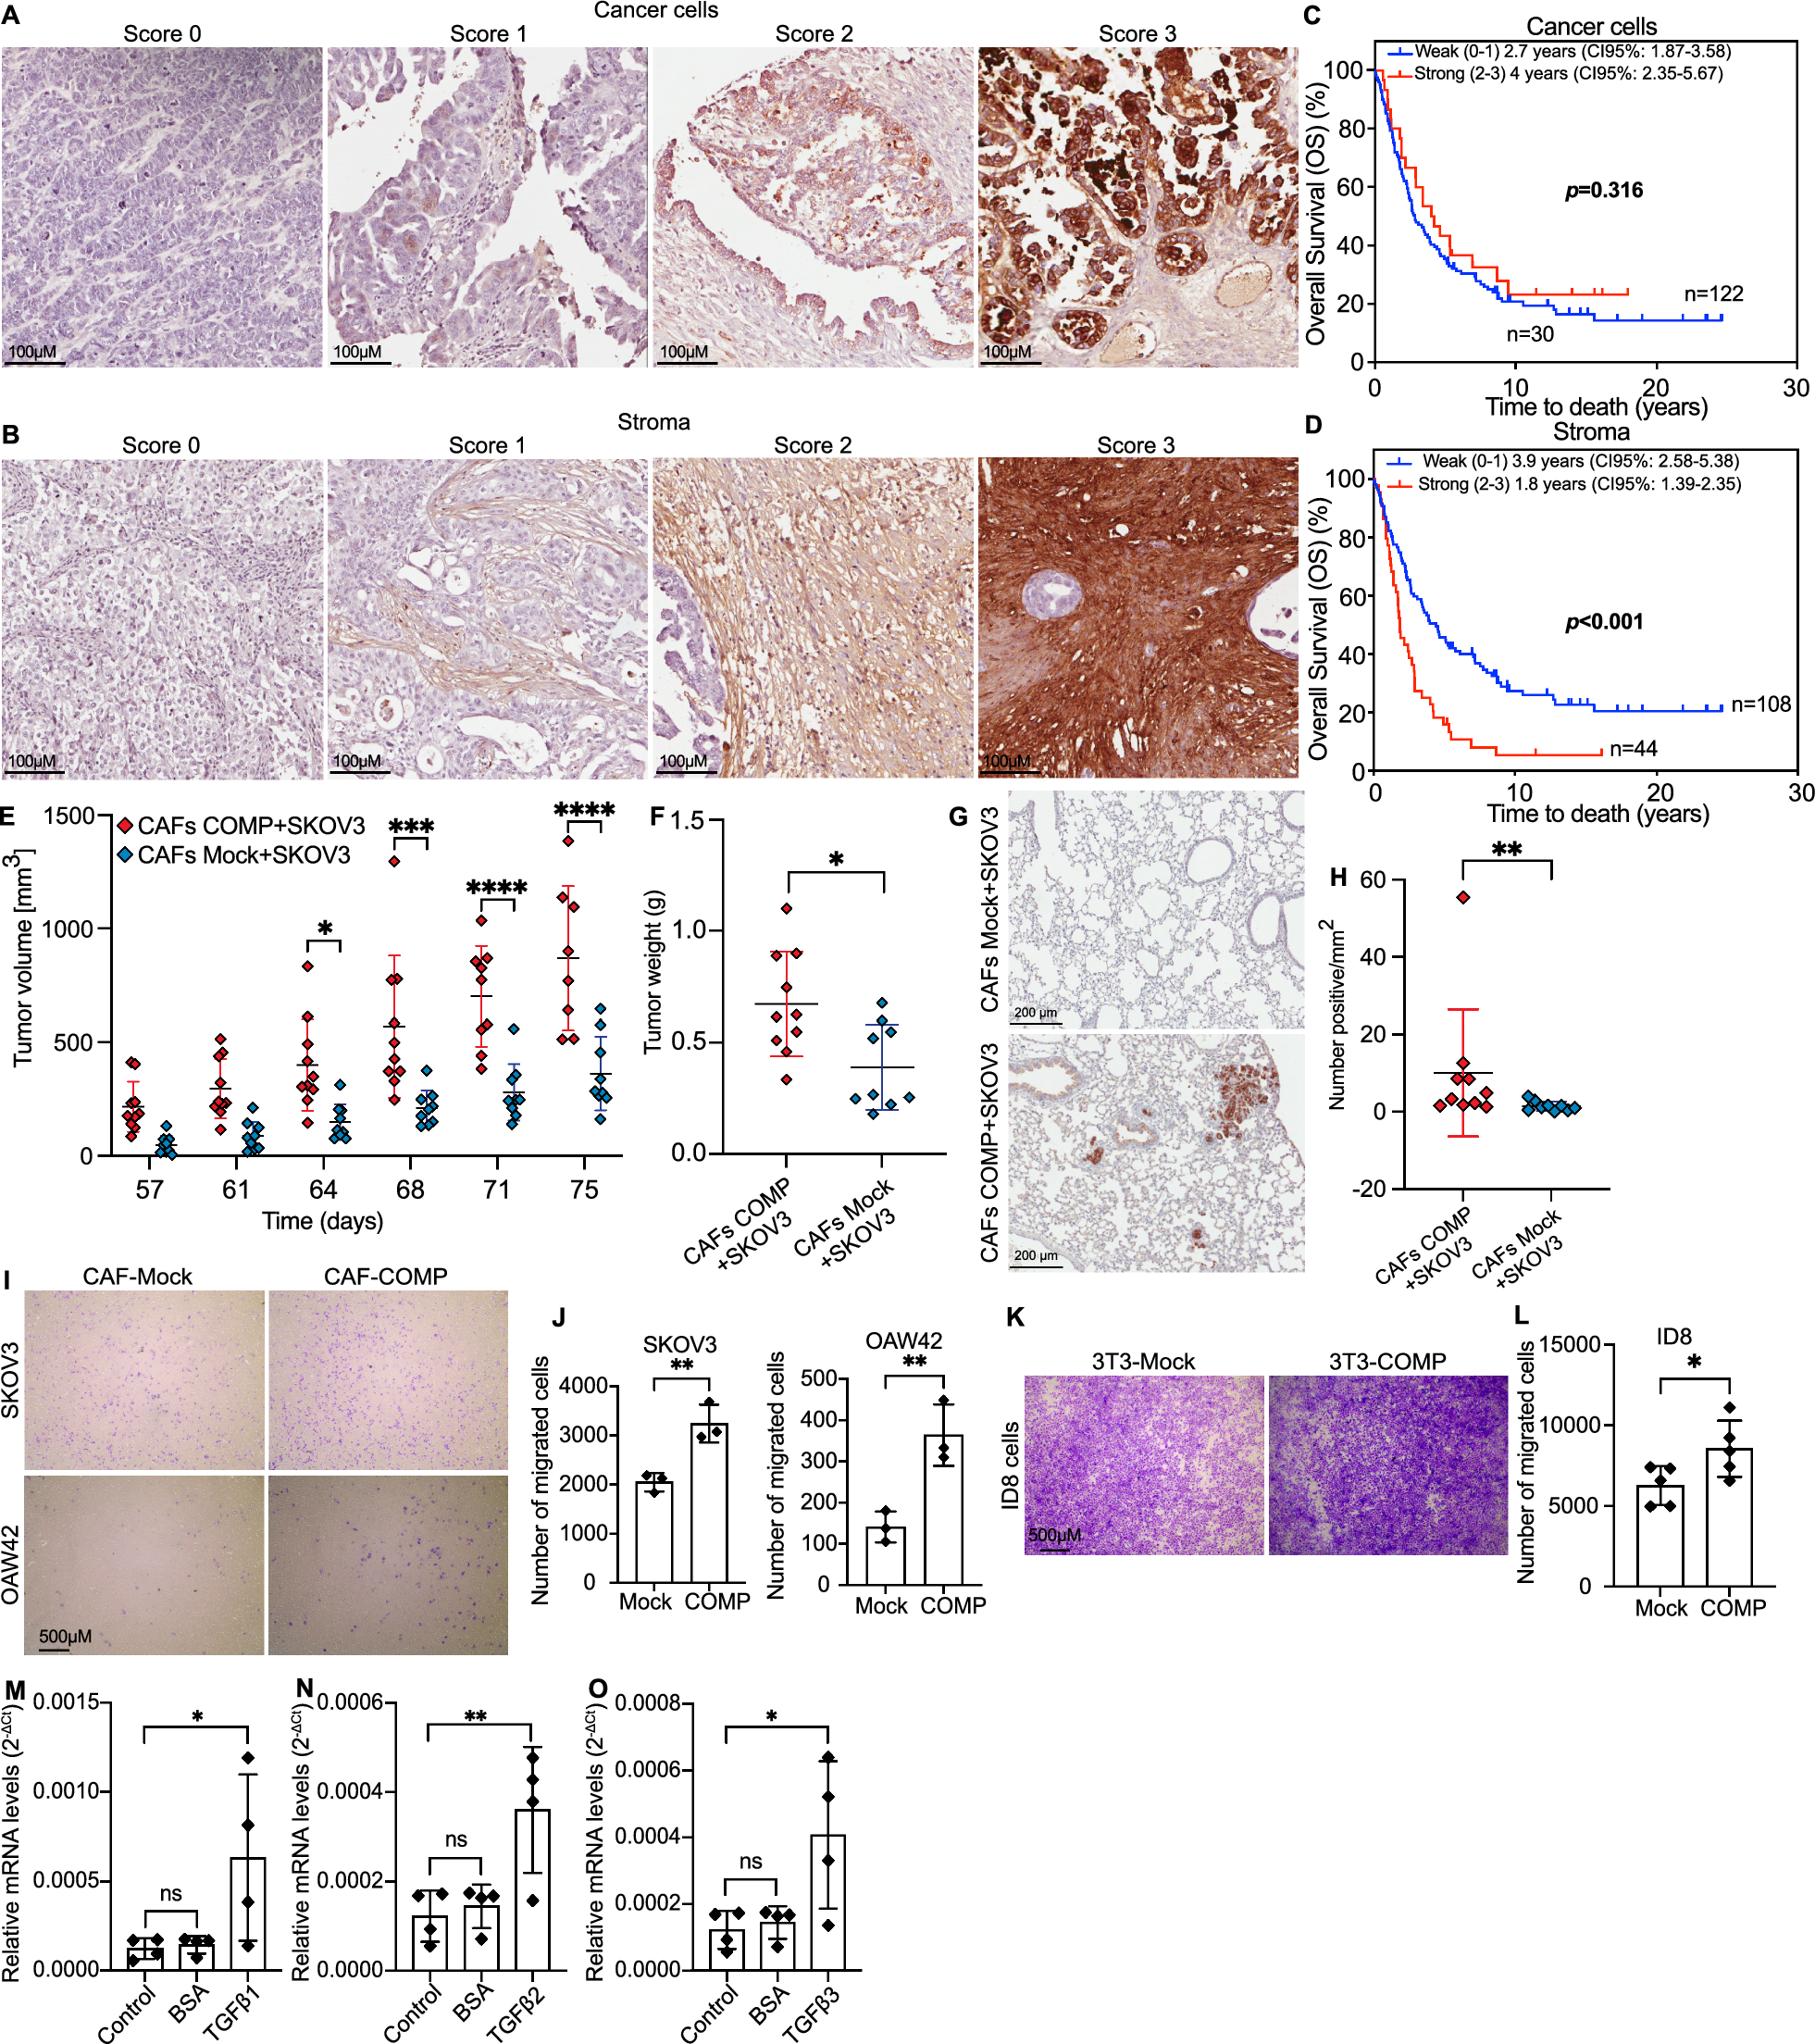 Stromal cartilage oligomeric matrix protein as a tumorigenic driver in ovarian cancer via Notch3 signaling and epithelial-to-mesenchymal transition